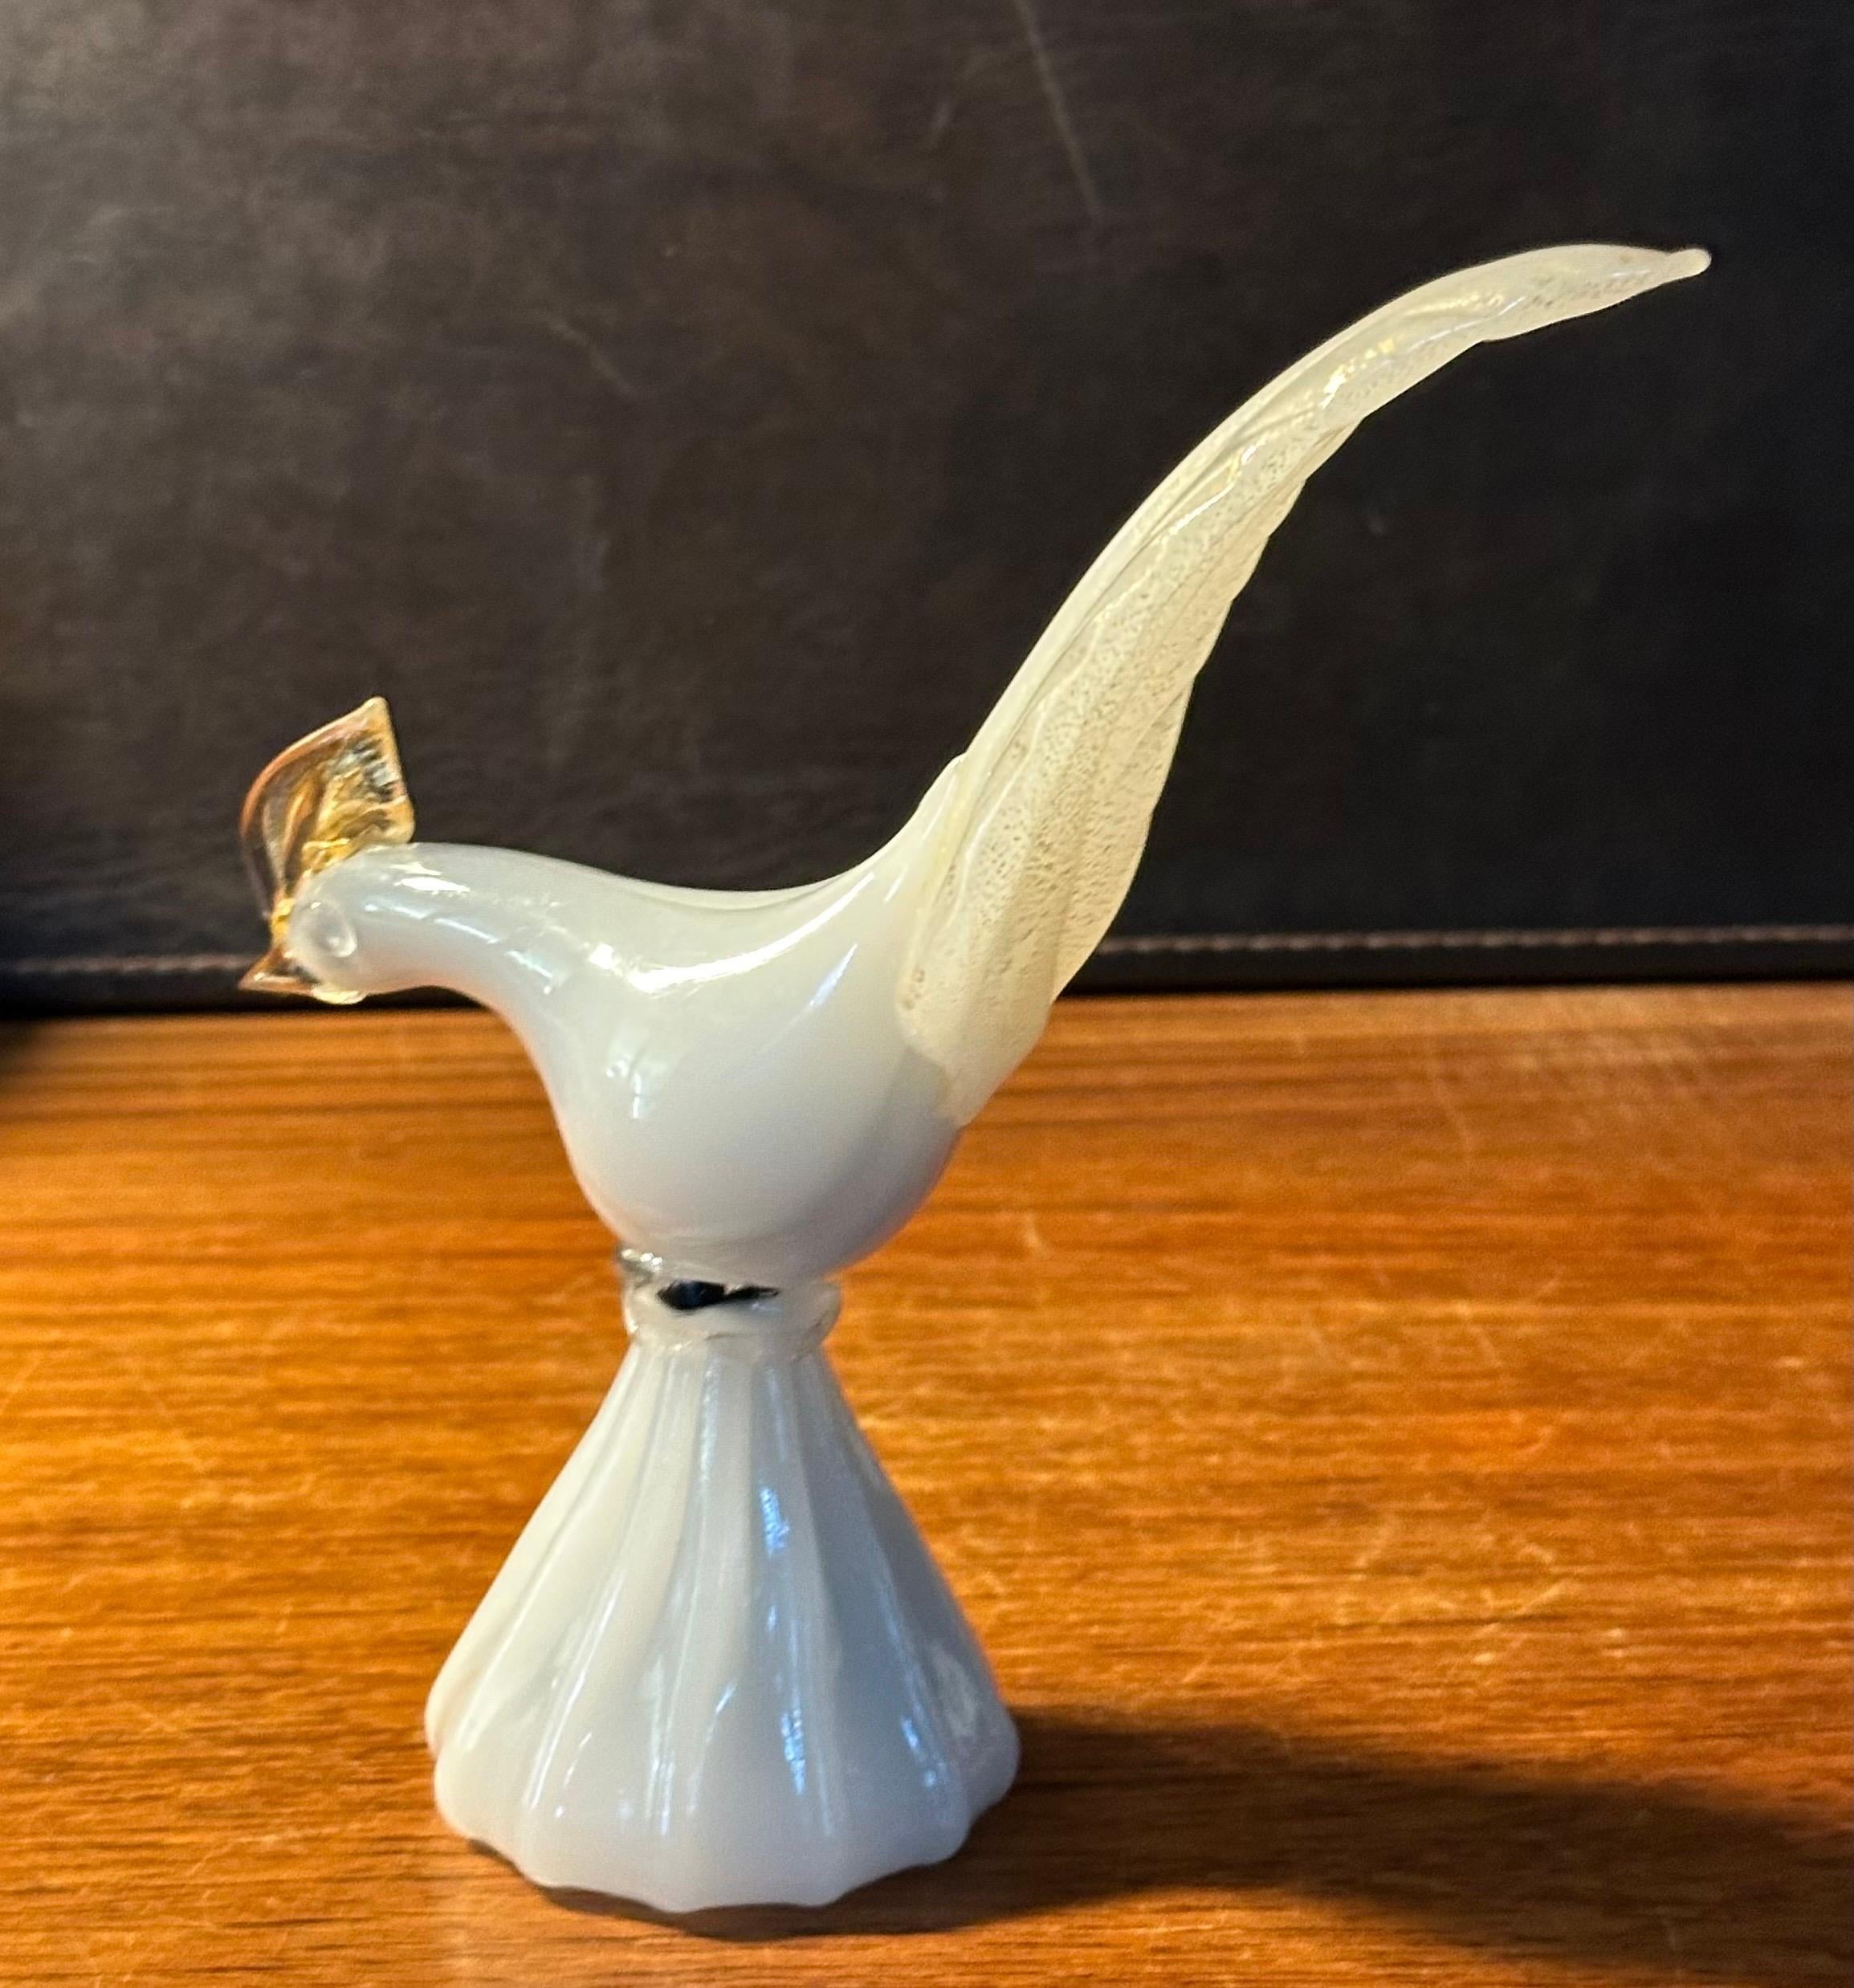 Stylish Art Glass Bird Sculpture by Murano Glass In Good Condition For Sale In San Diego, CA